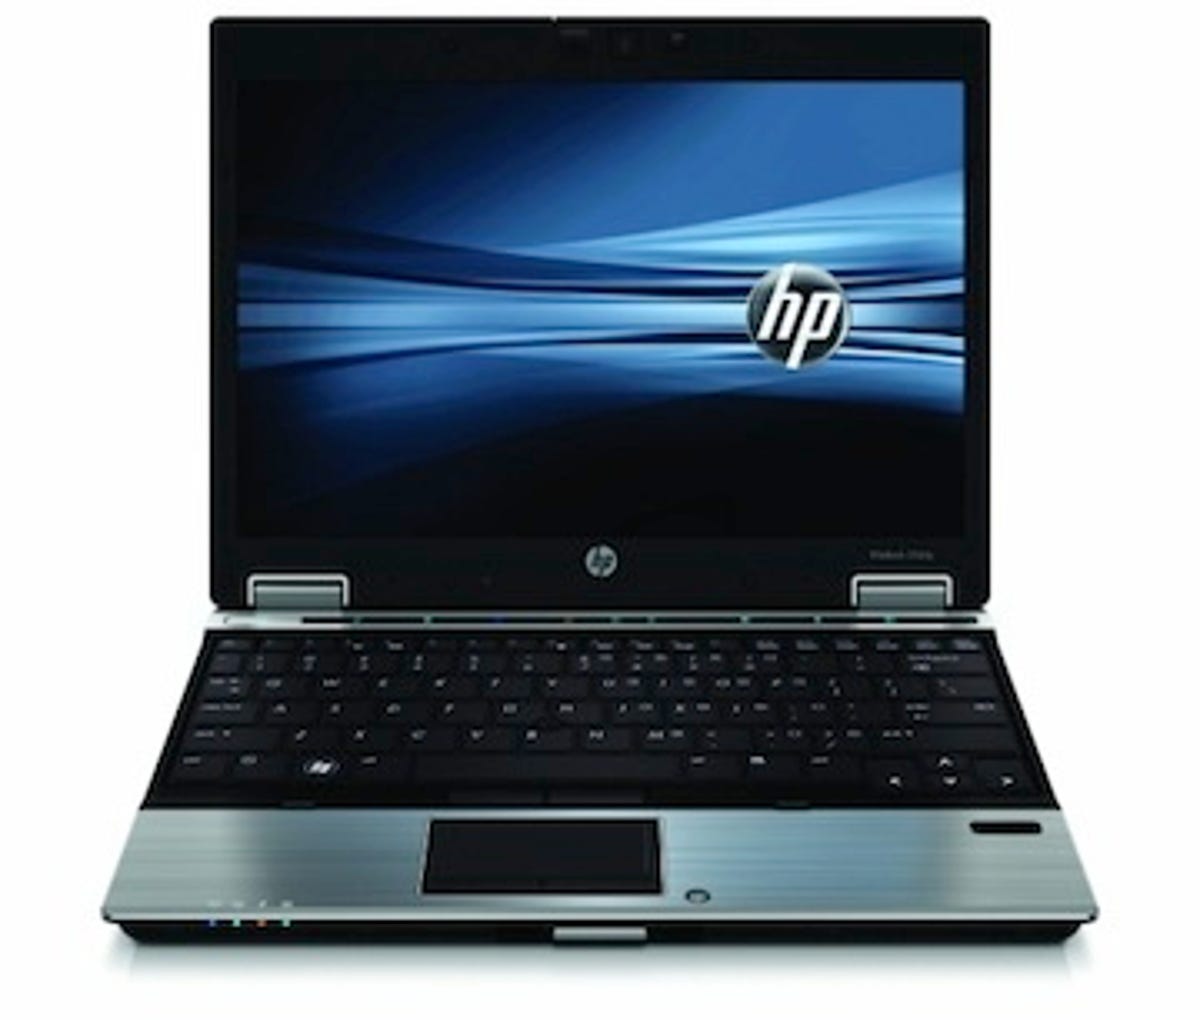 The HP EliteBook 2540p has been a successful business model for HP. Today, this model sports a 12.1-inch screen, weighs about 3.5 pounds, and uses prior-generation Core i5, i7 chips.